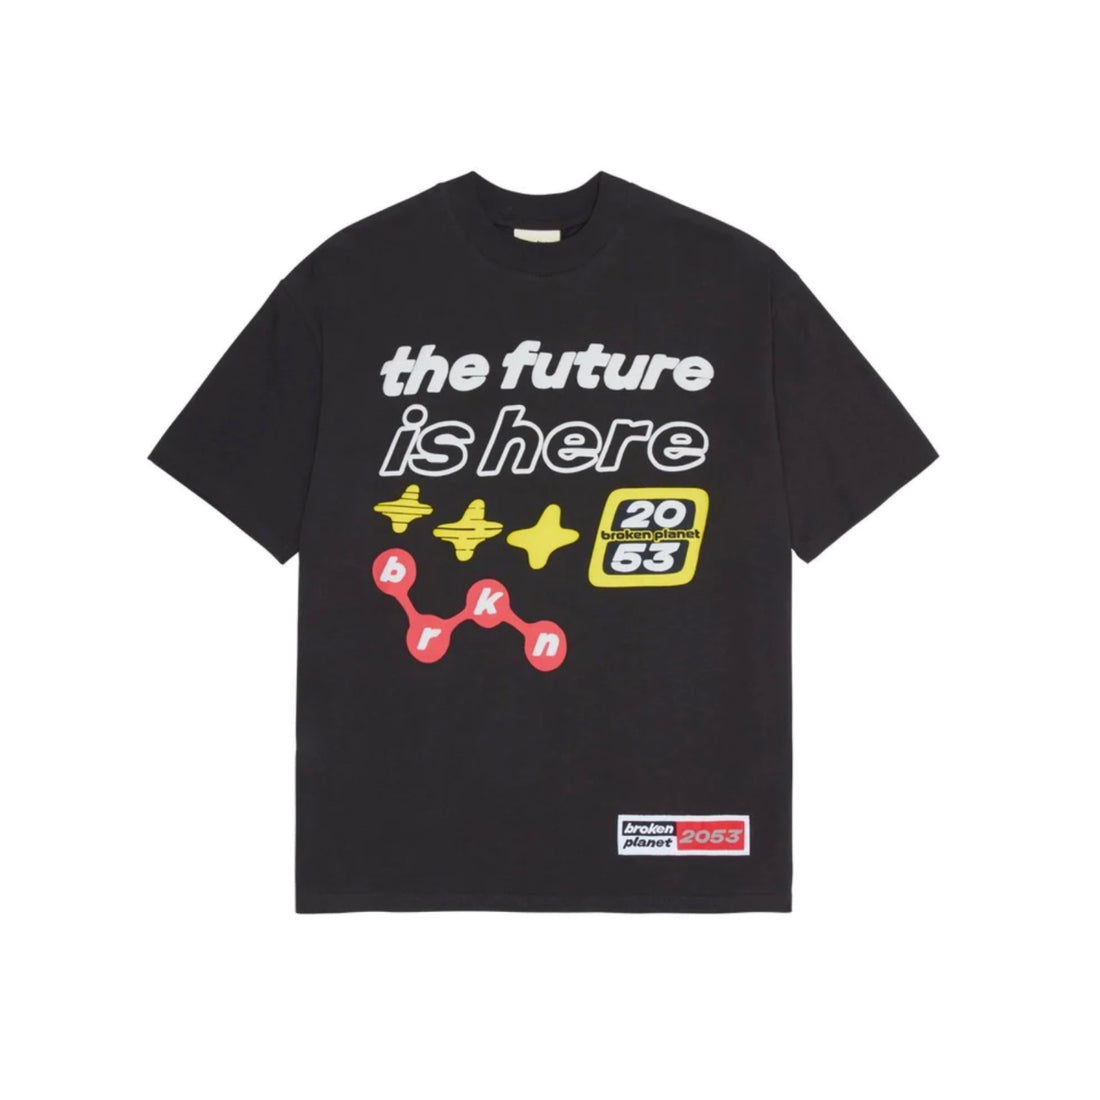 Broken Planet “The Future Is Here” T Shirt